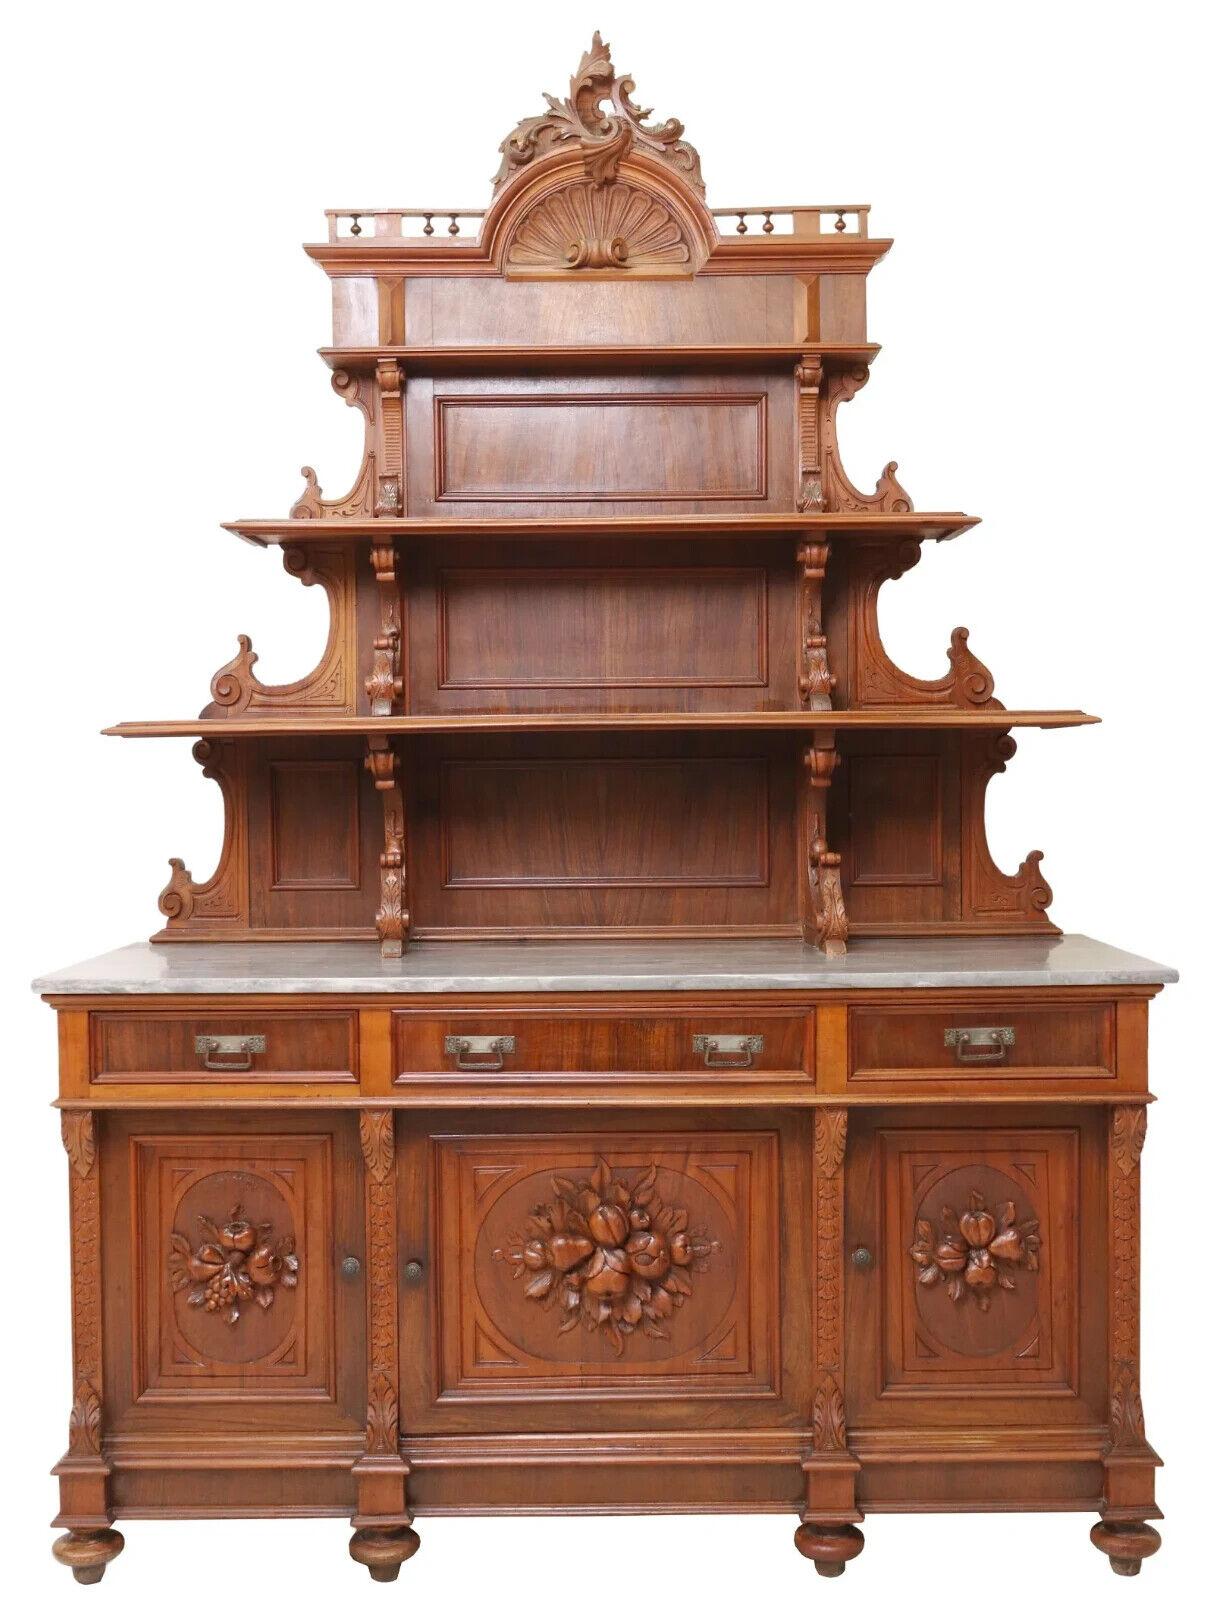 Stunning Antique Sideboard, Italian Marble-Top, Carved, Foliate, Display, 19th Century, 1800s!!

This lovely antique Italian sideboard was made during the 19th Century. This lovely cabinet is accented with foliate carving. The raised shelved back